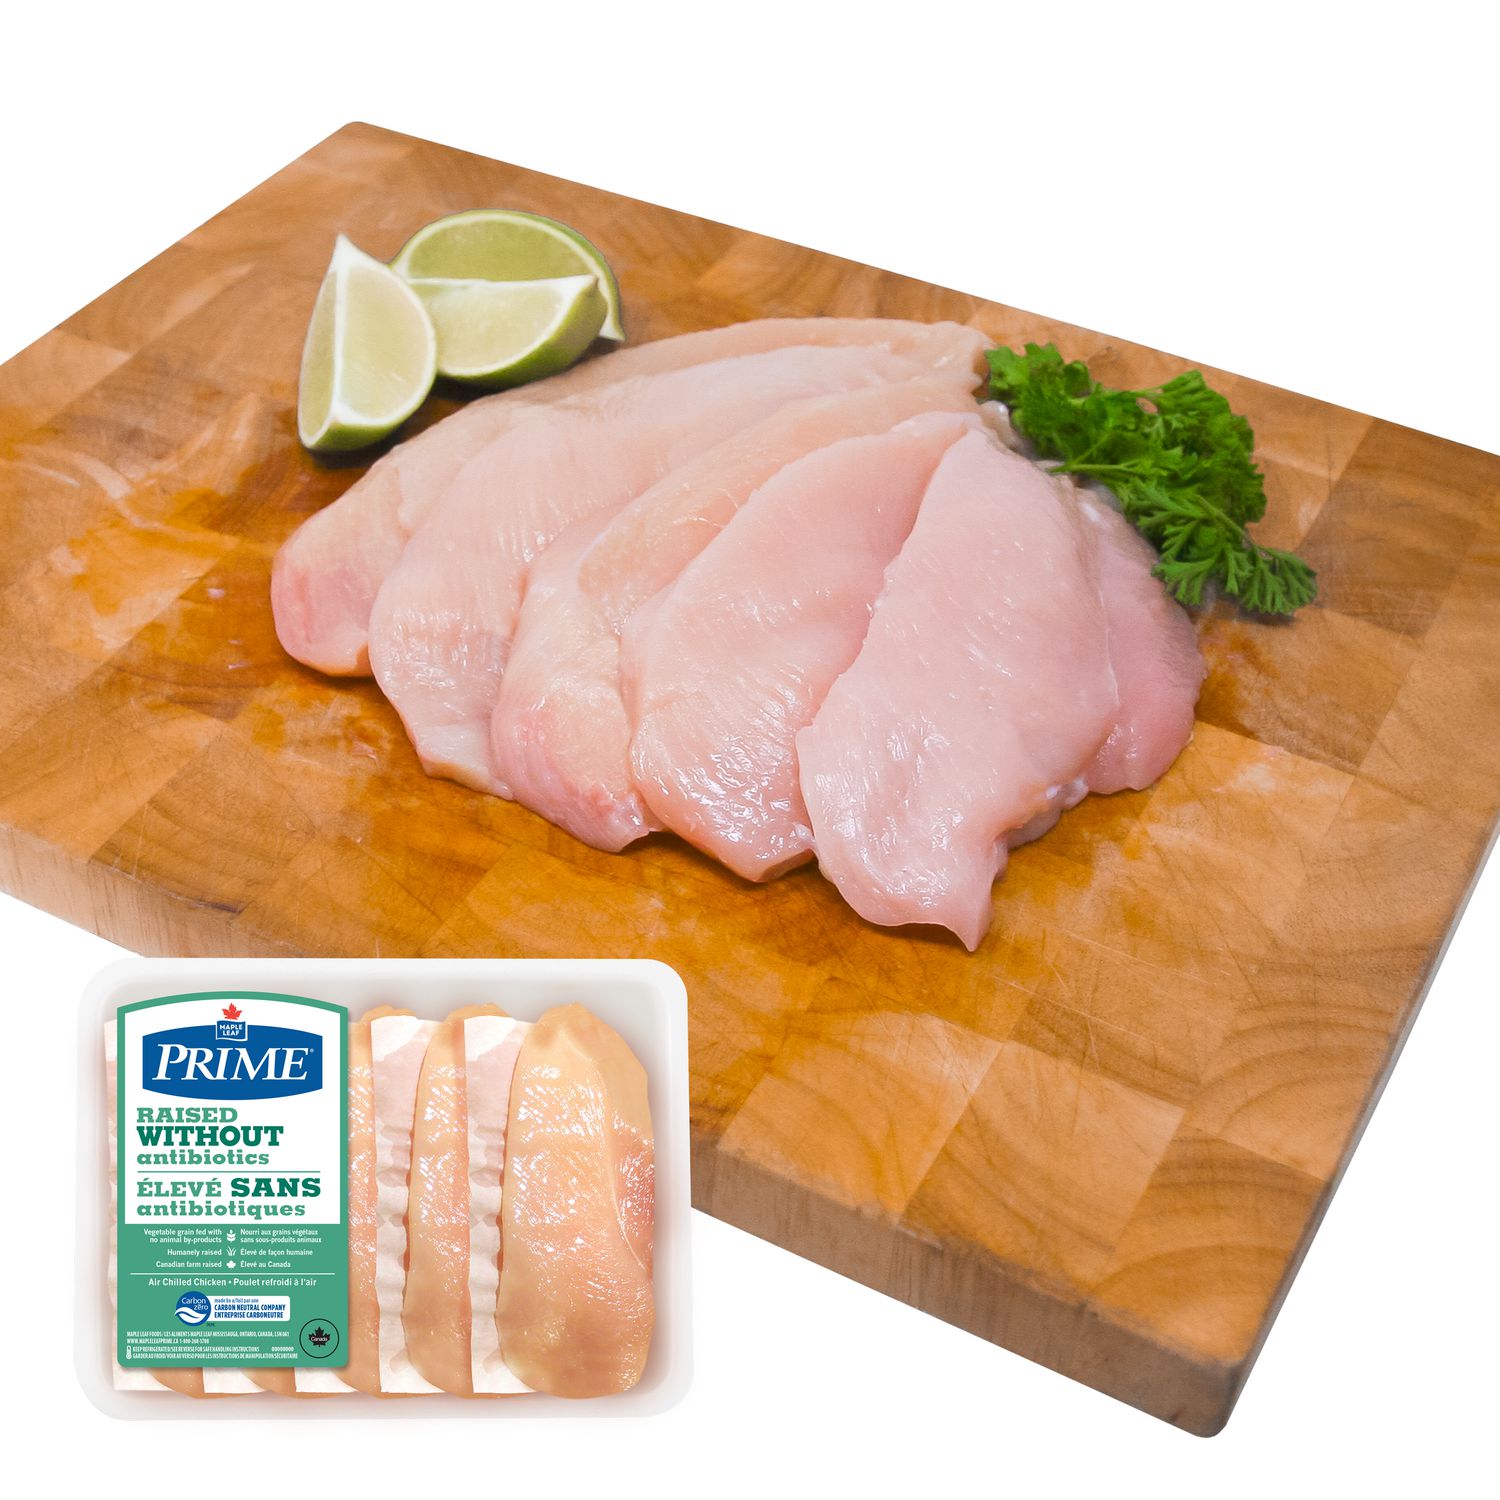 Maple Leaf Prime Raised without Antibiotics Thin Sliced Chicken Breast